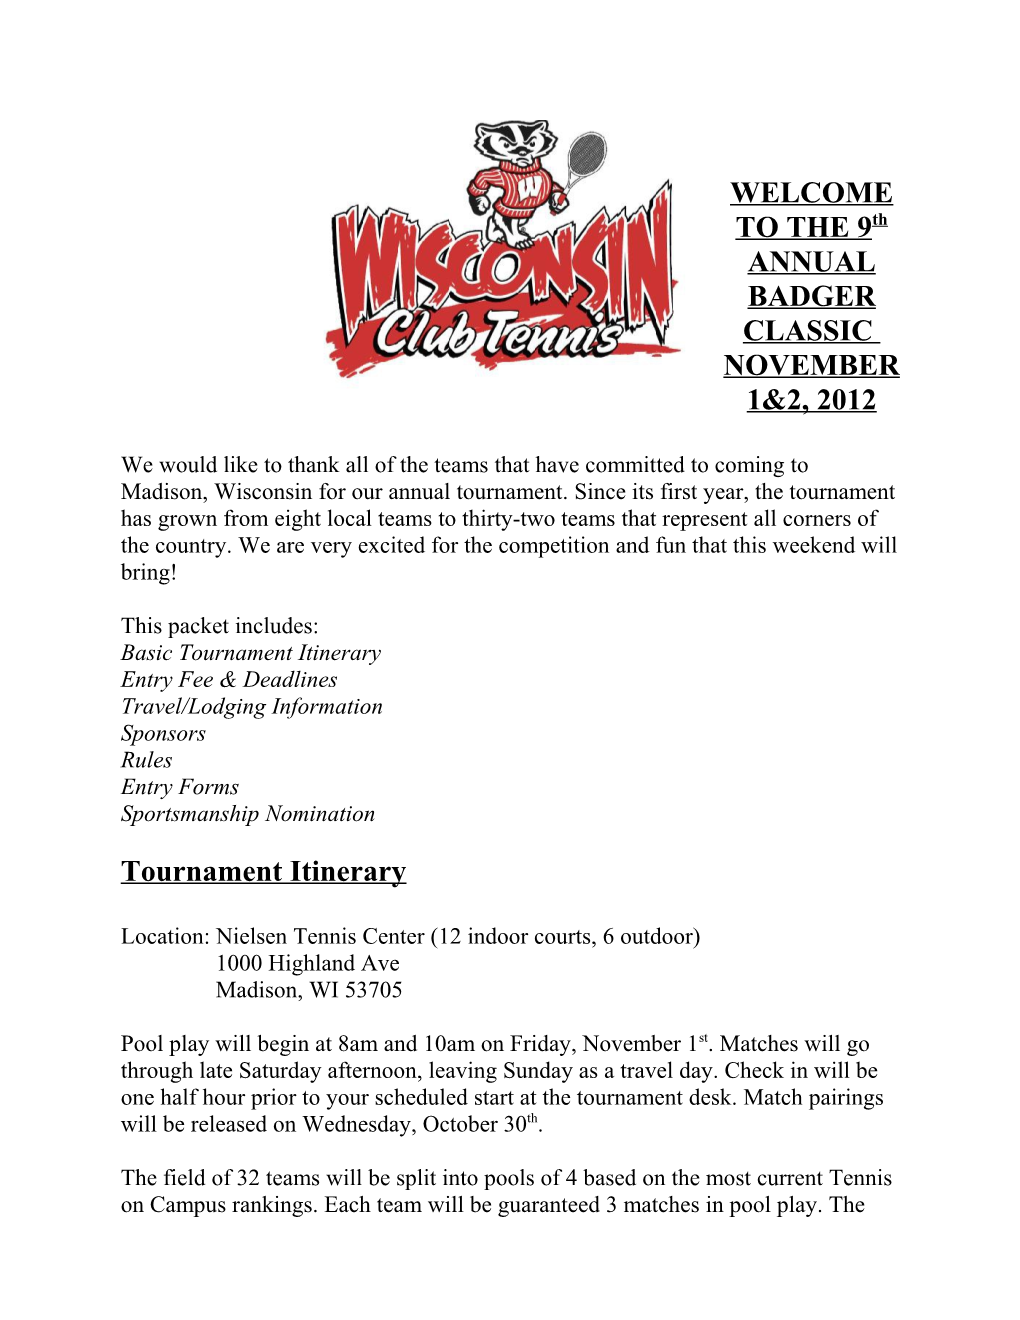 WELCOME to the 9Th ANNUAL BADGER CLASSIC